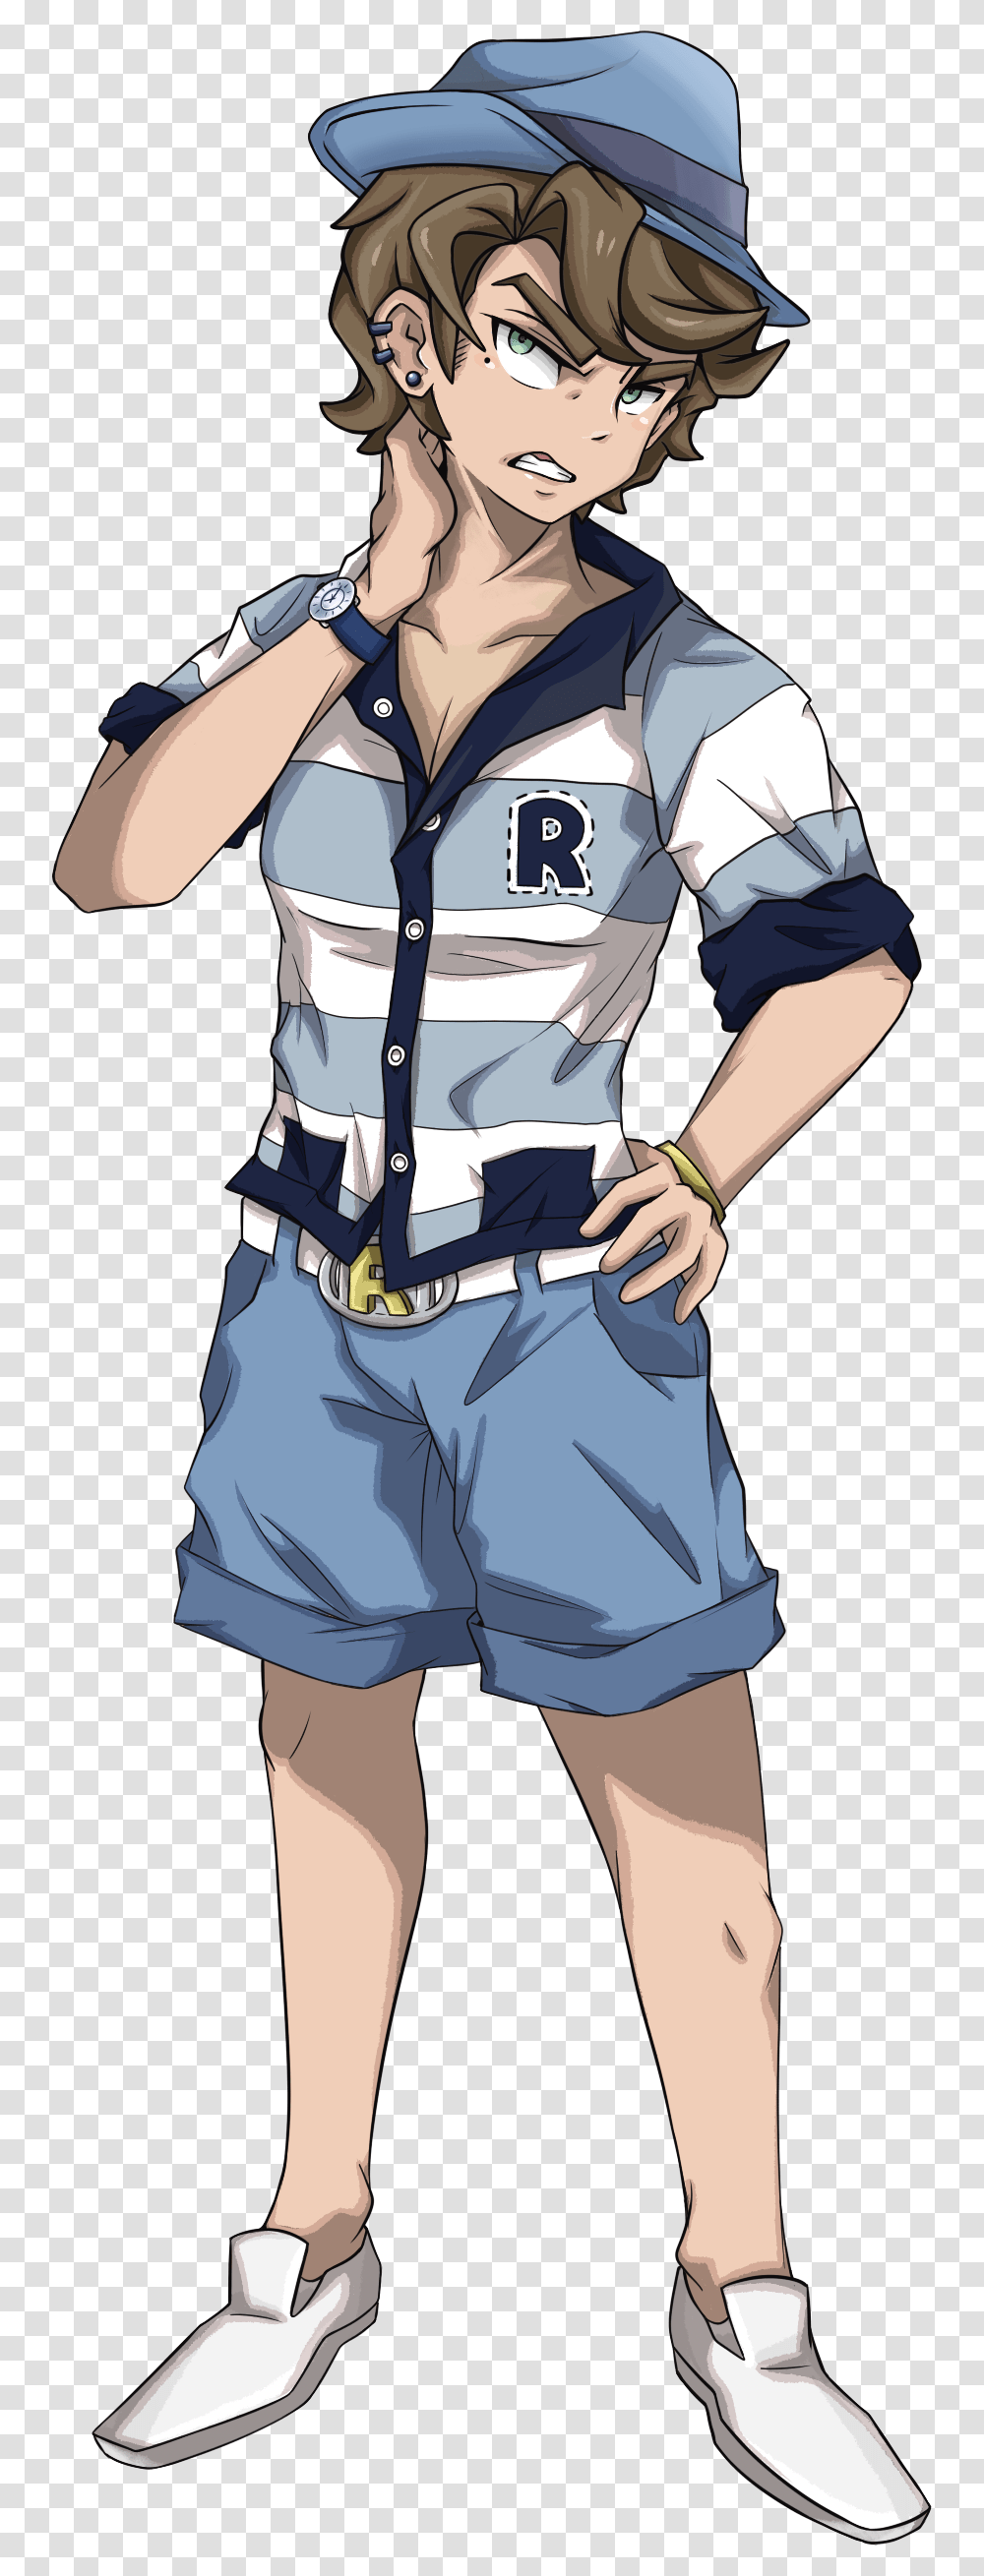 Marco Pokemon Trainer Bases Free, Shorts, Clothing, Apparel, Comics Transparent Png